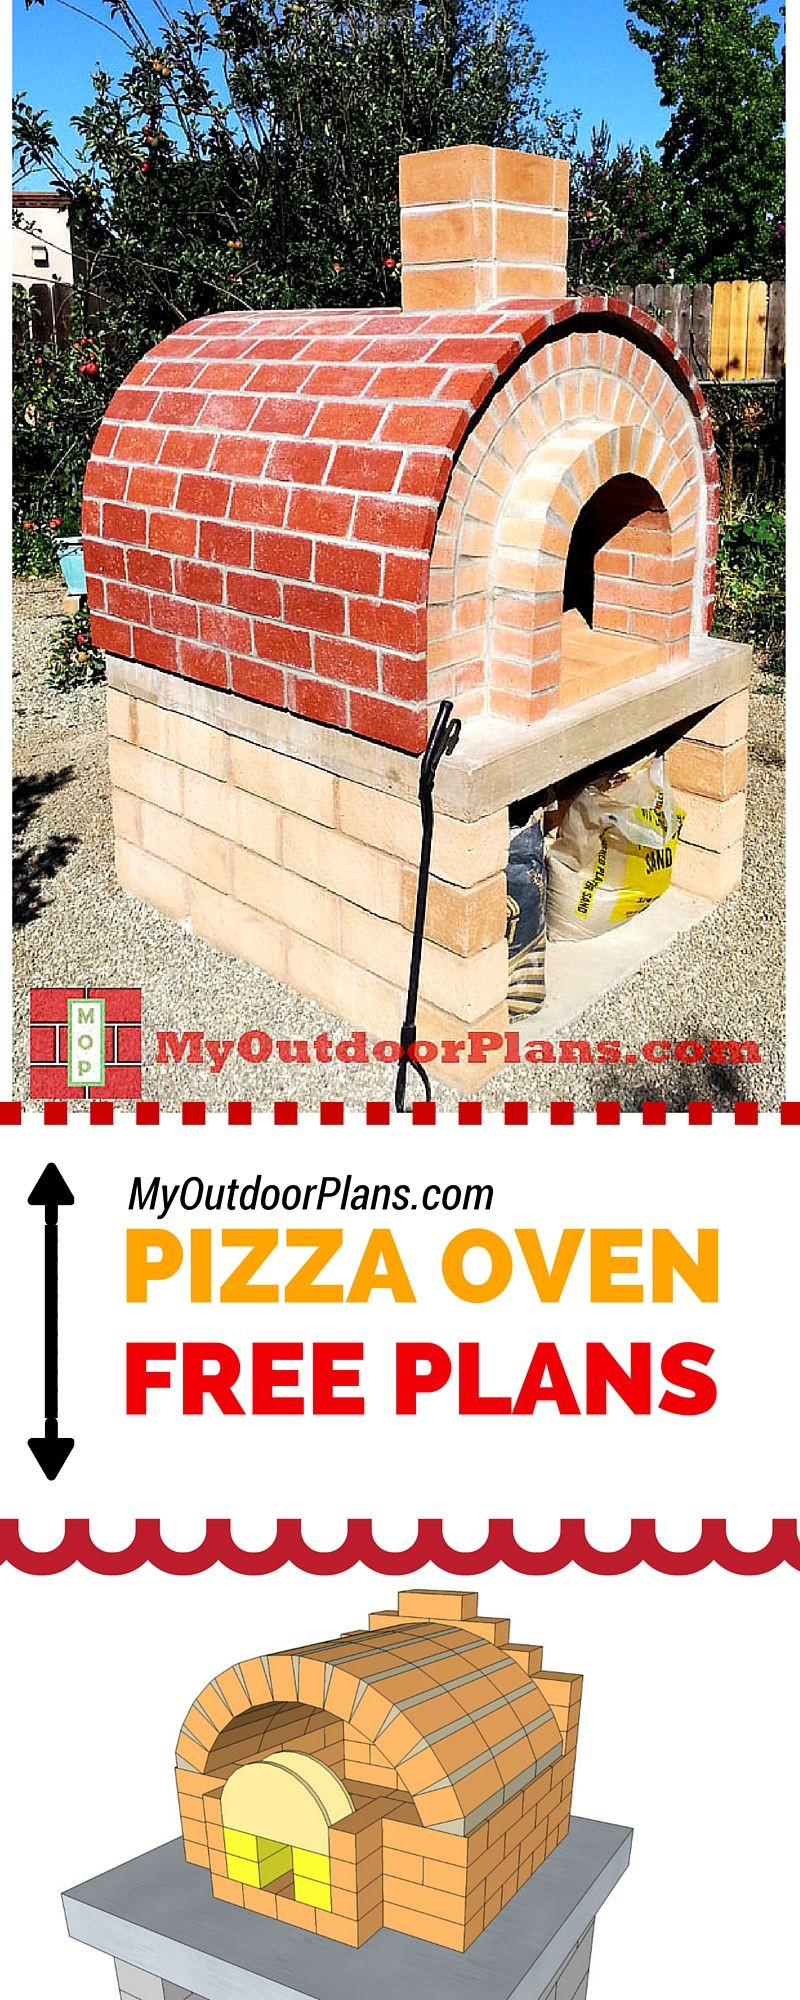 DIY Pizza Oven Plans Free
 Pizza oven plans Easy to follow instructions and